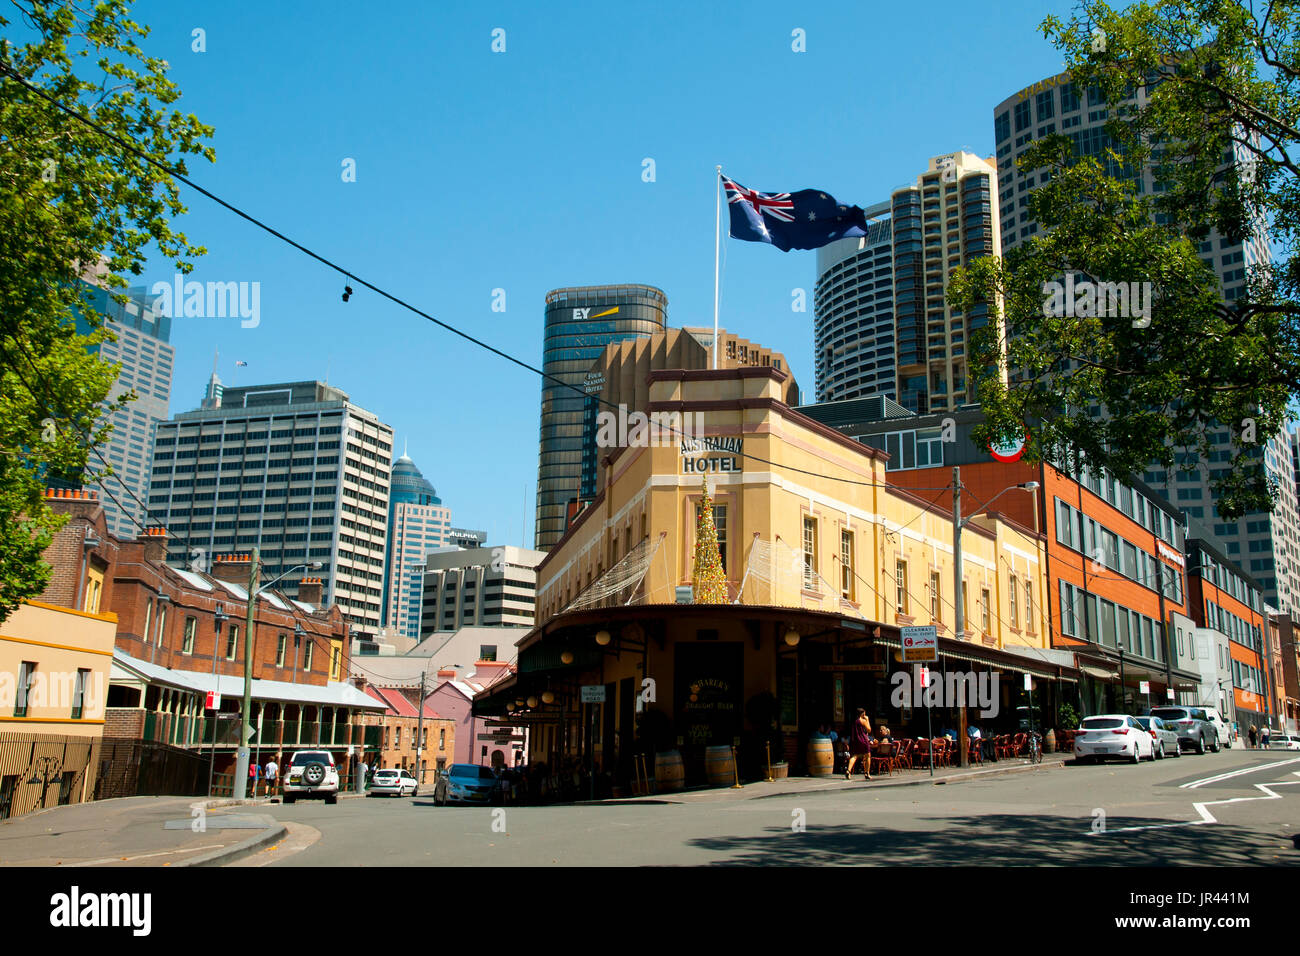 SYDNEY, AUSTRALIA - December 12, 2016: The Heritage Hotel located on the corner of St & Cumberland St in "The district of Stock Photo - Alamy